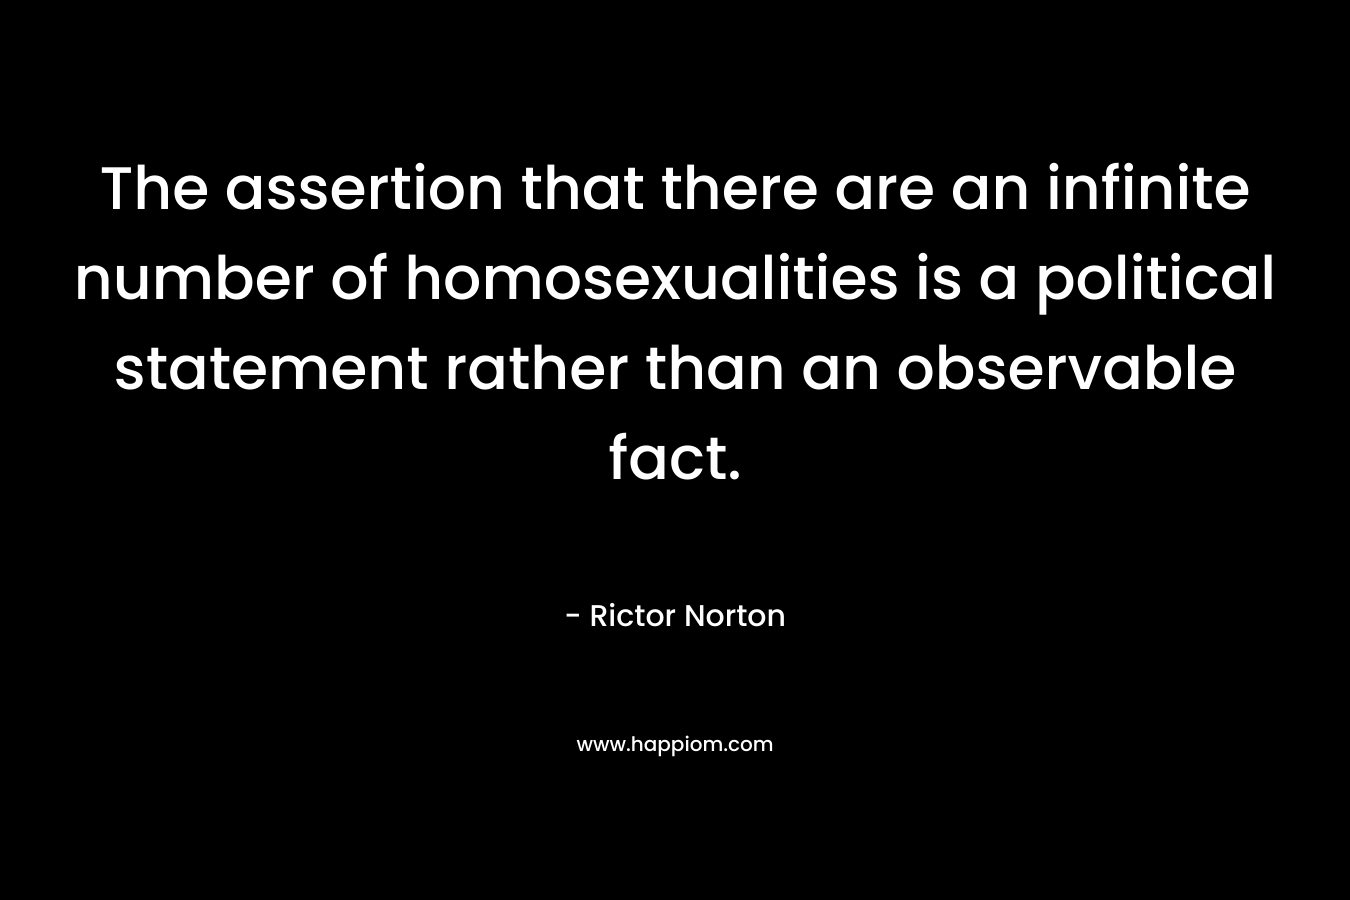 The assertion that there are an infinite number of homosexualities is a political statement rather than an observable fact.